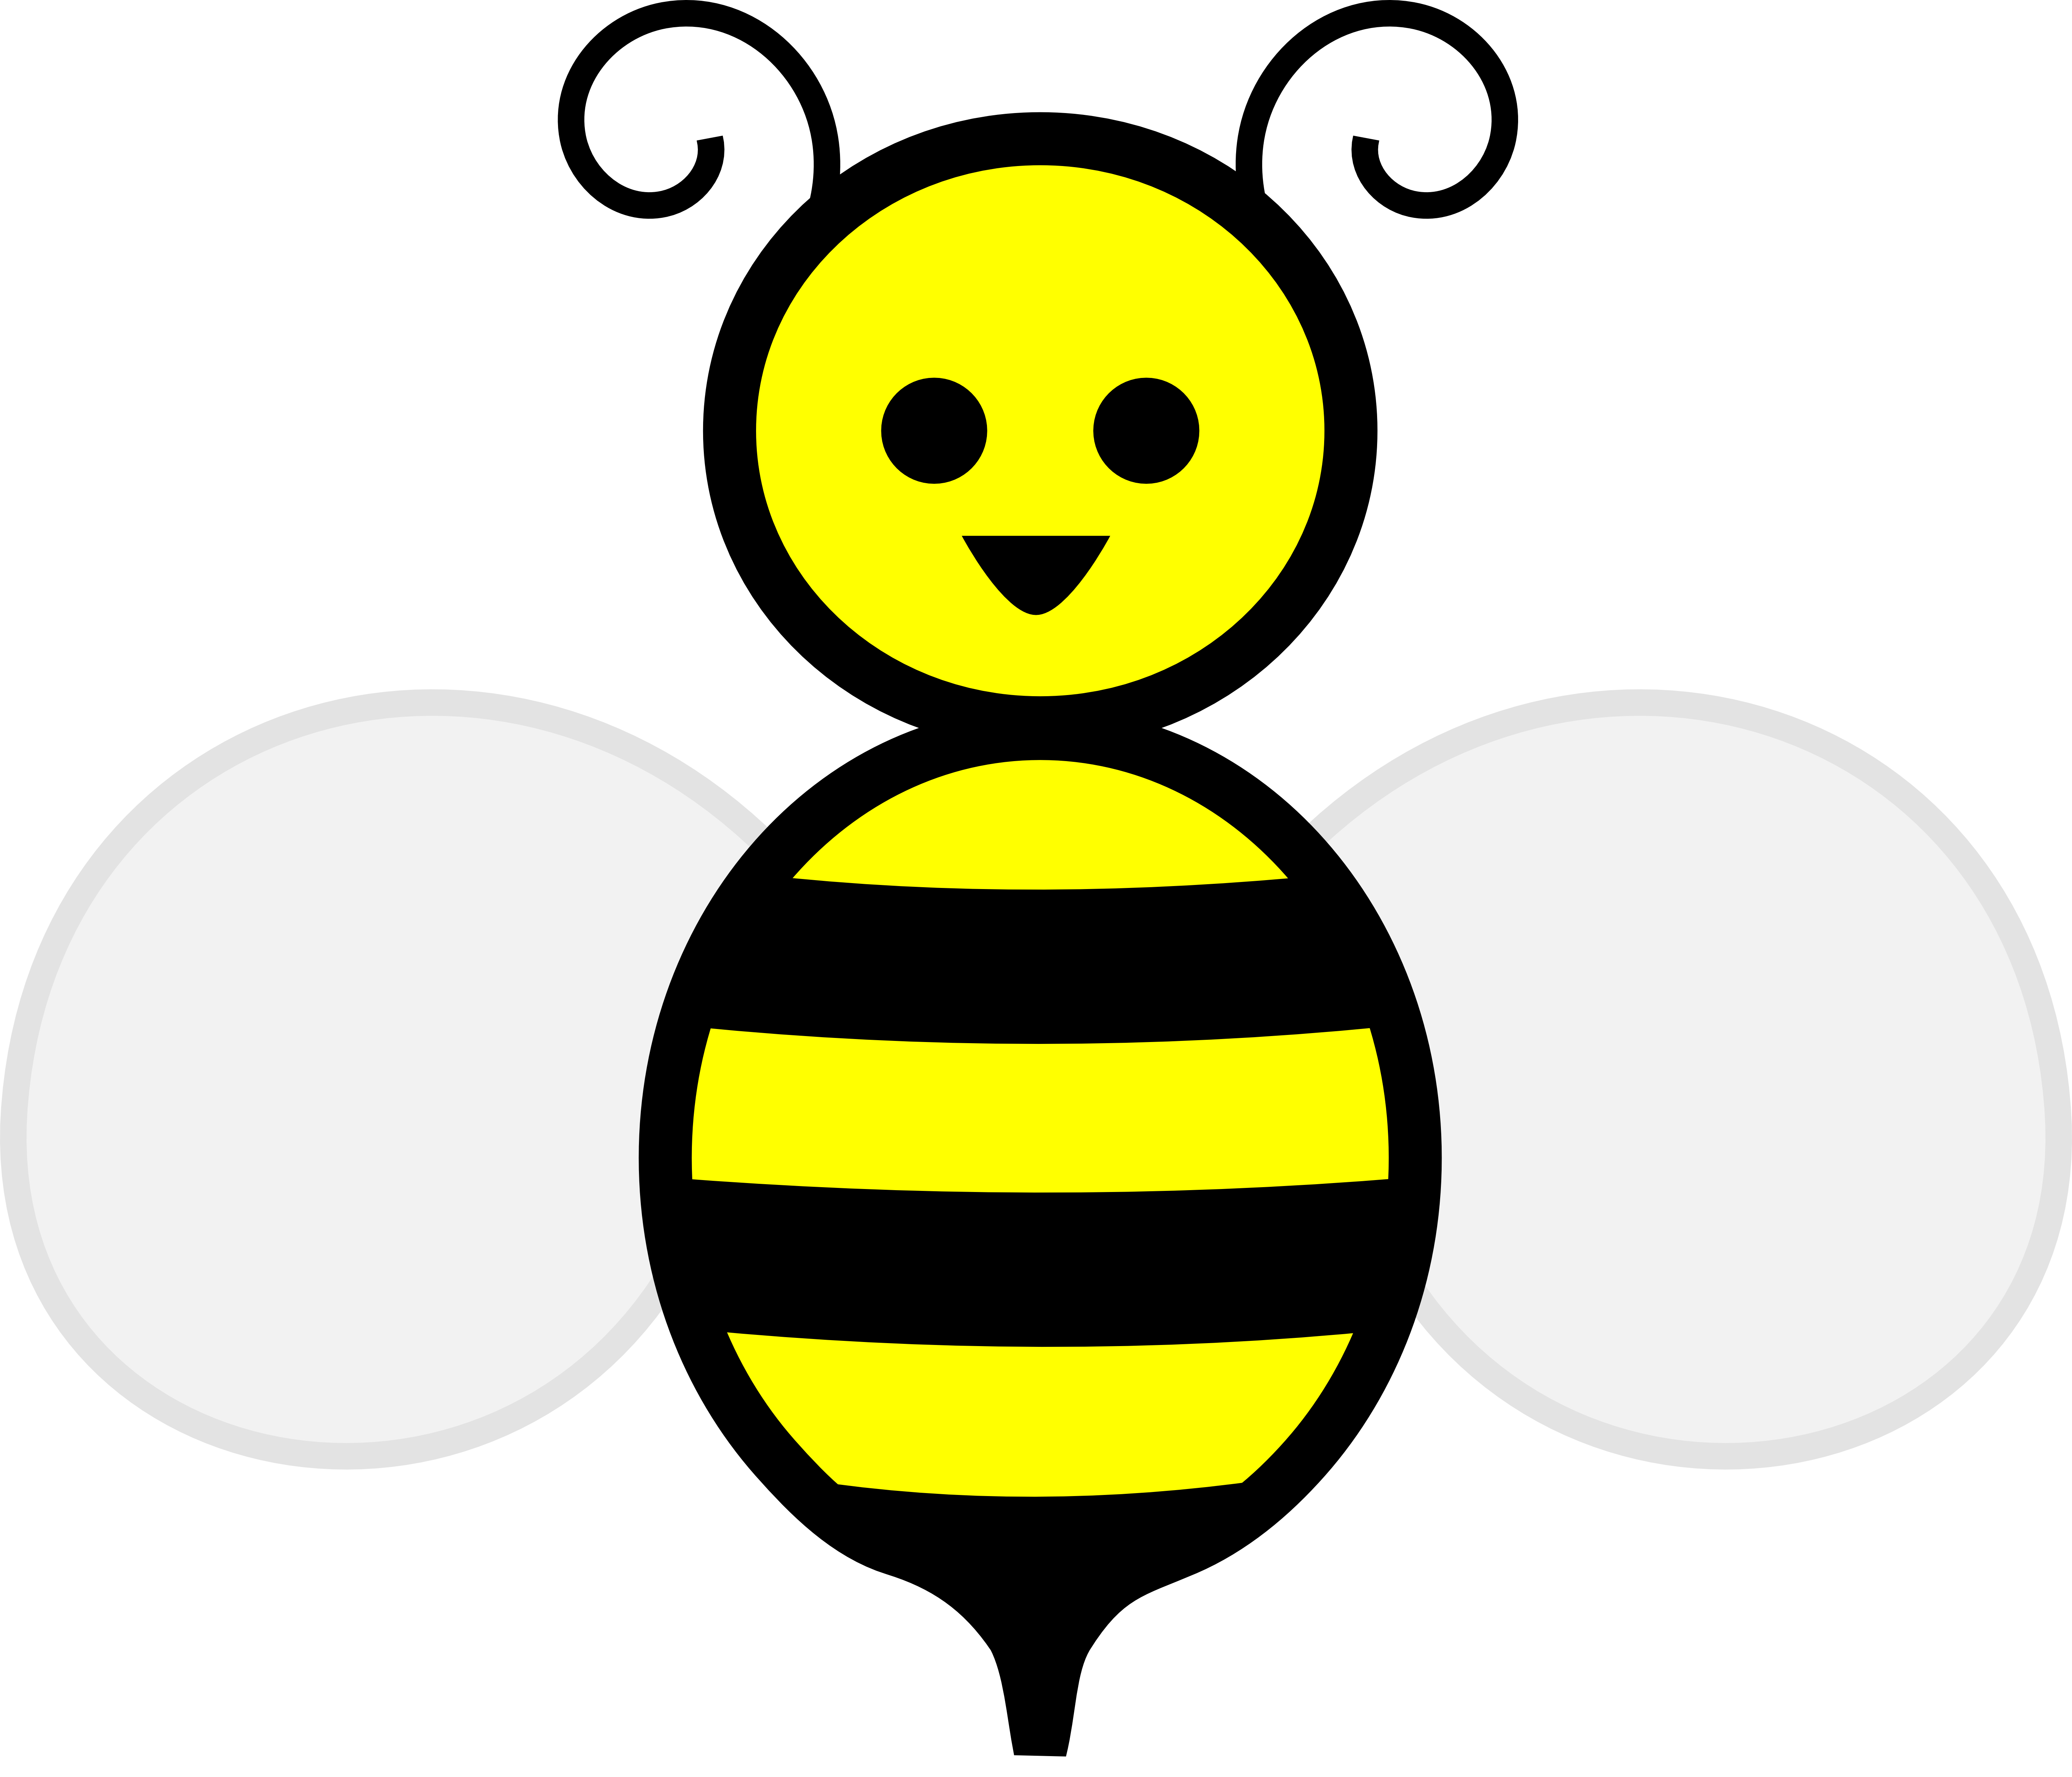 Honey bee clip art images free clipart images clipartwiz